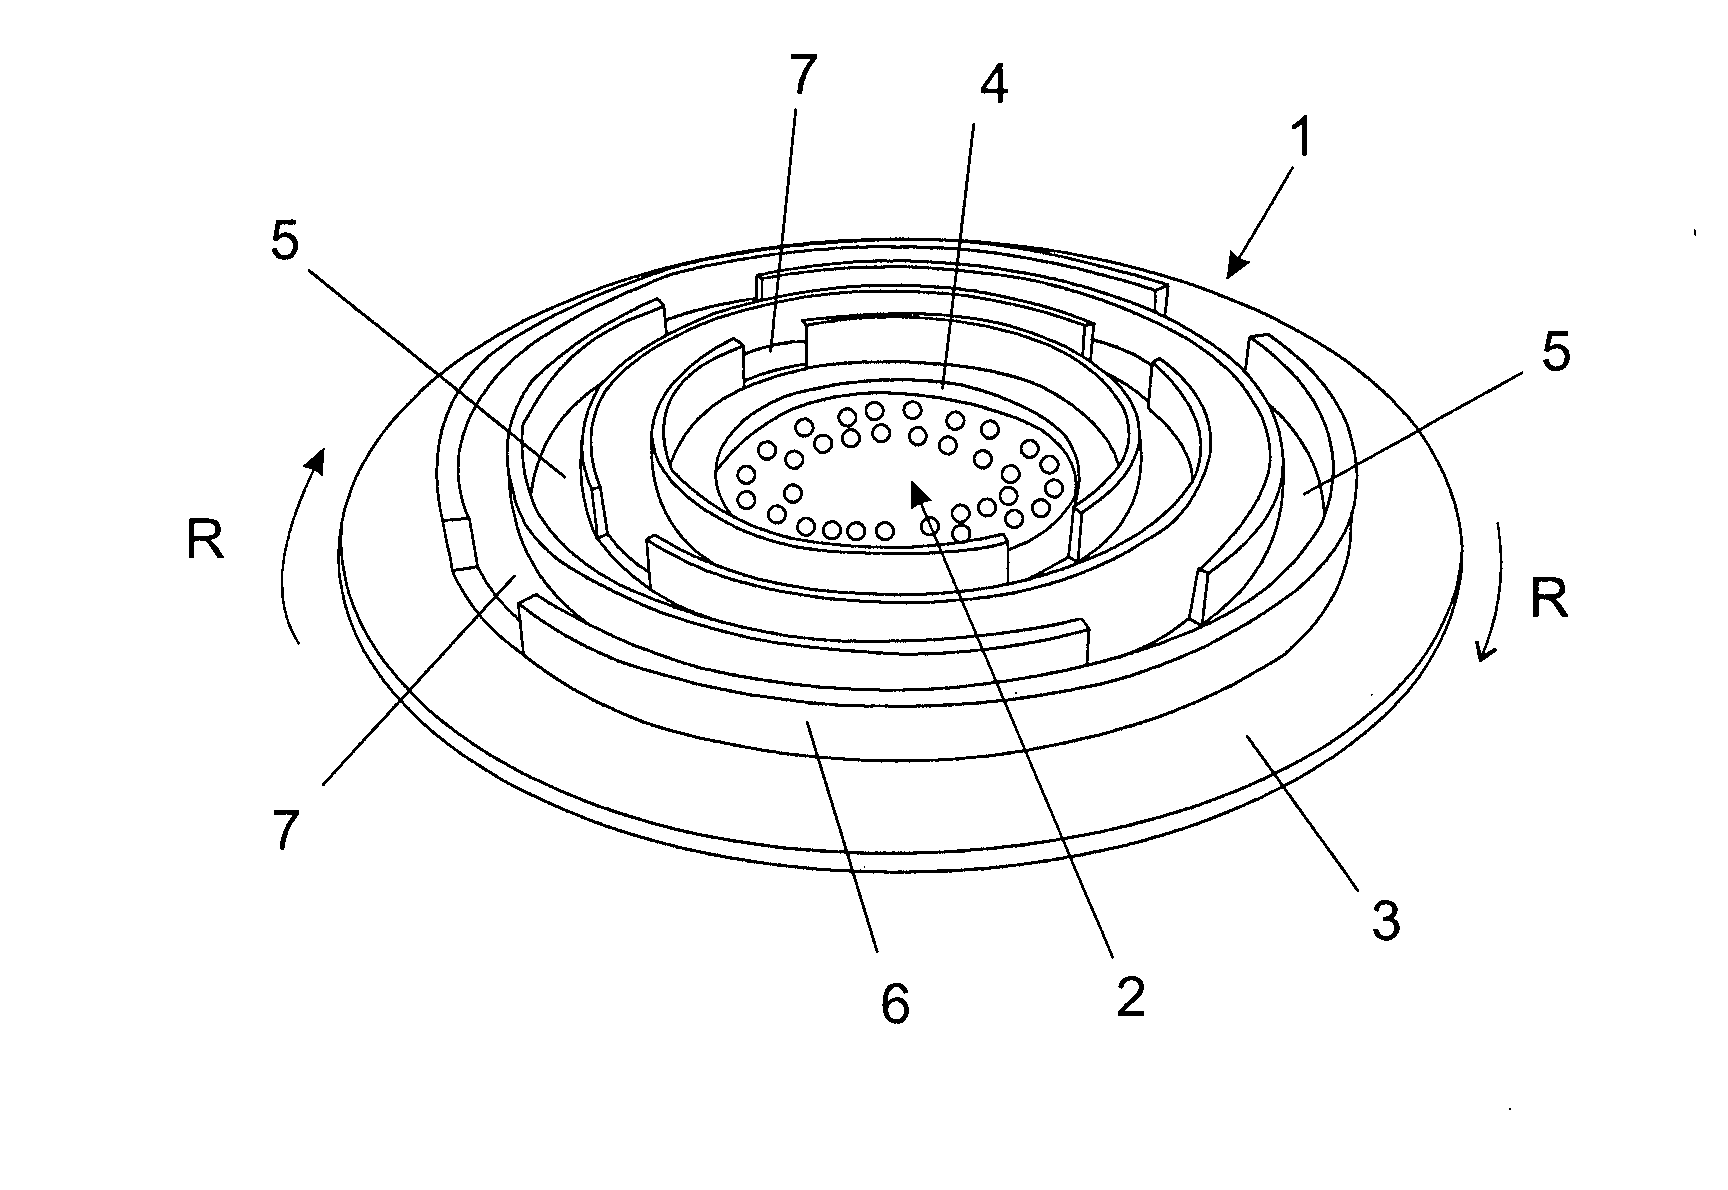 Gas flow directing device for burners of cooking appliances